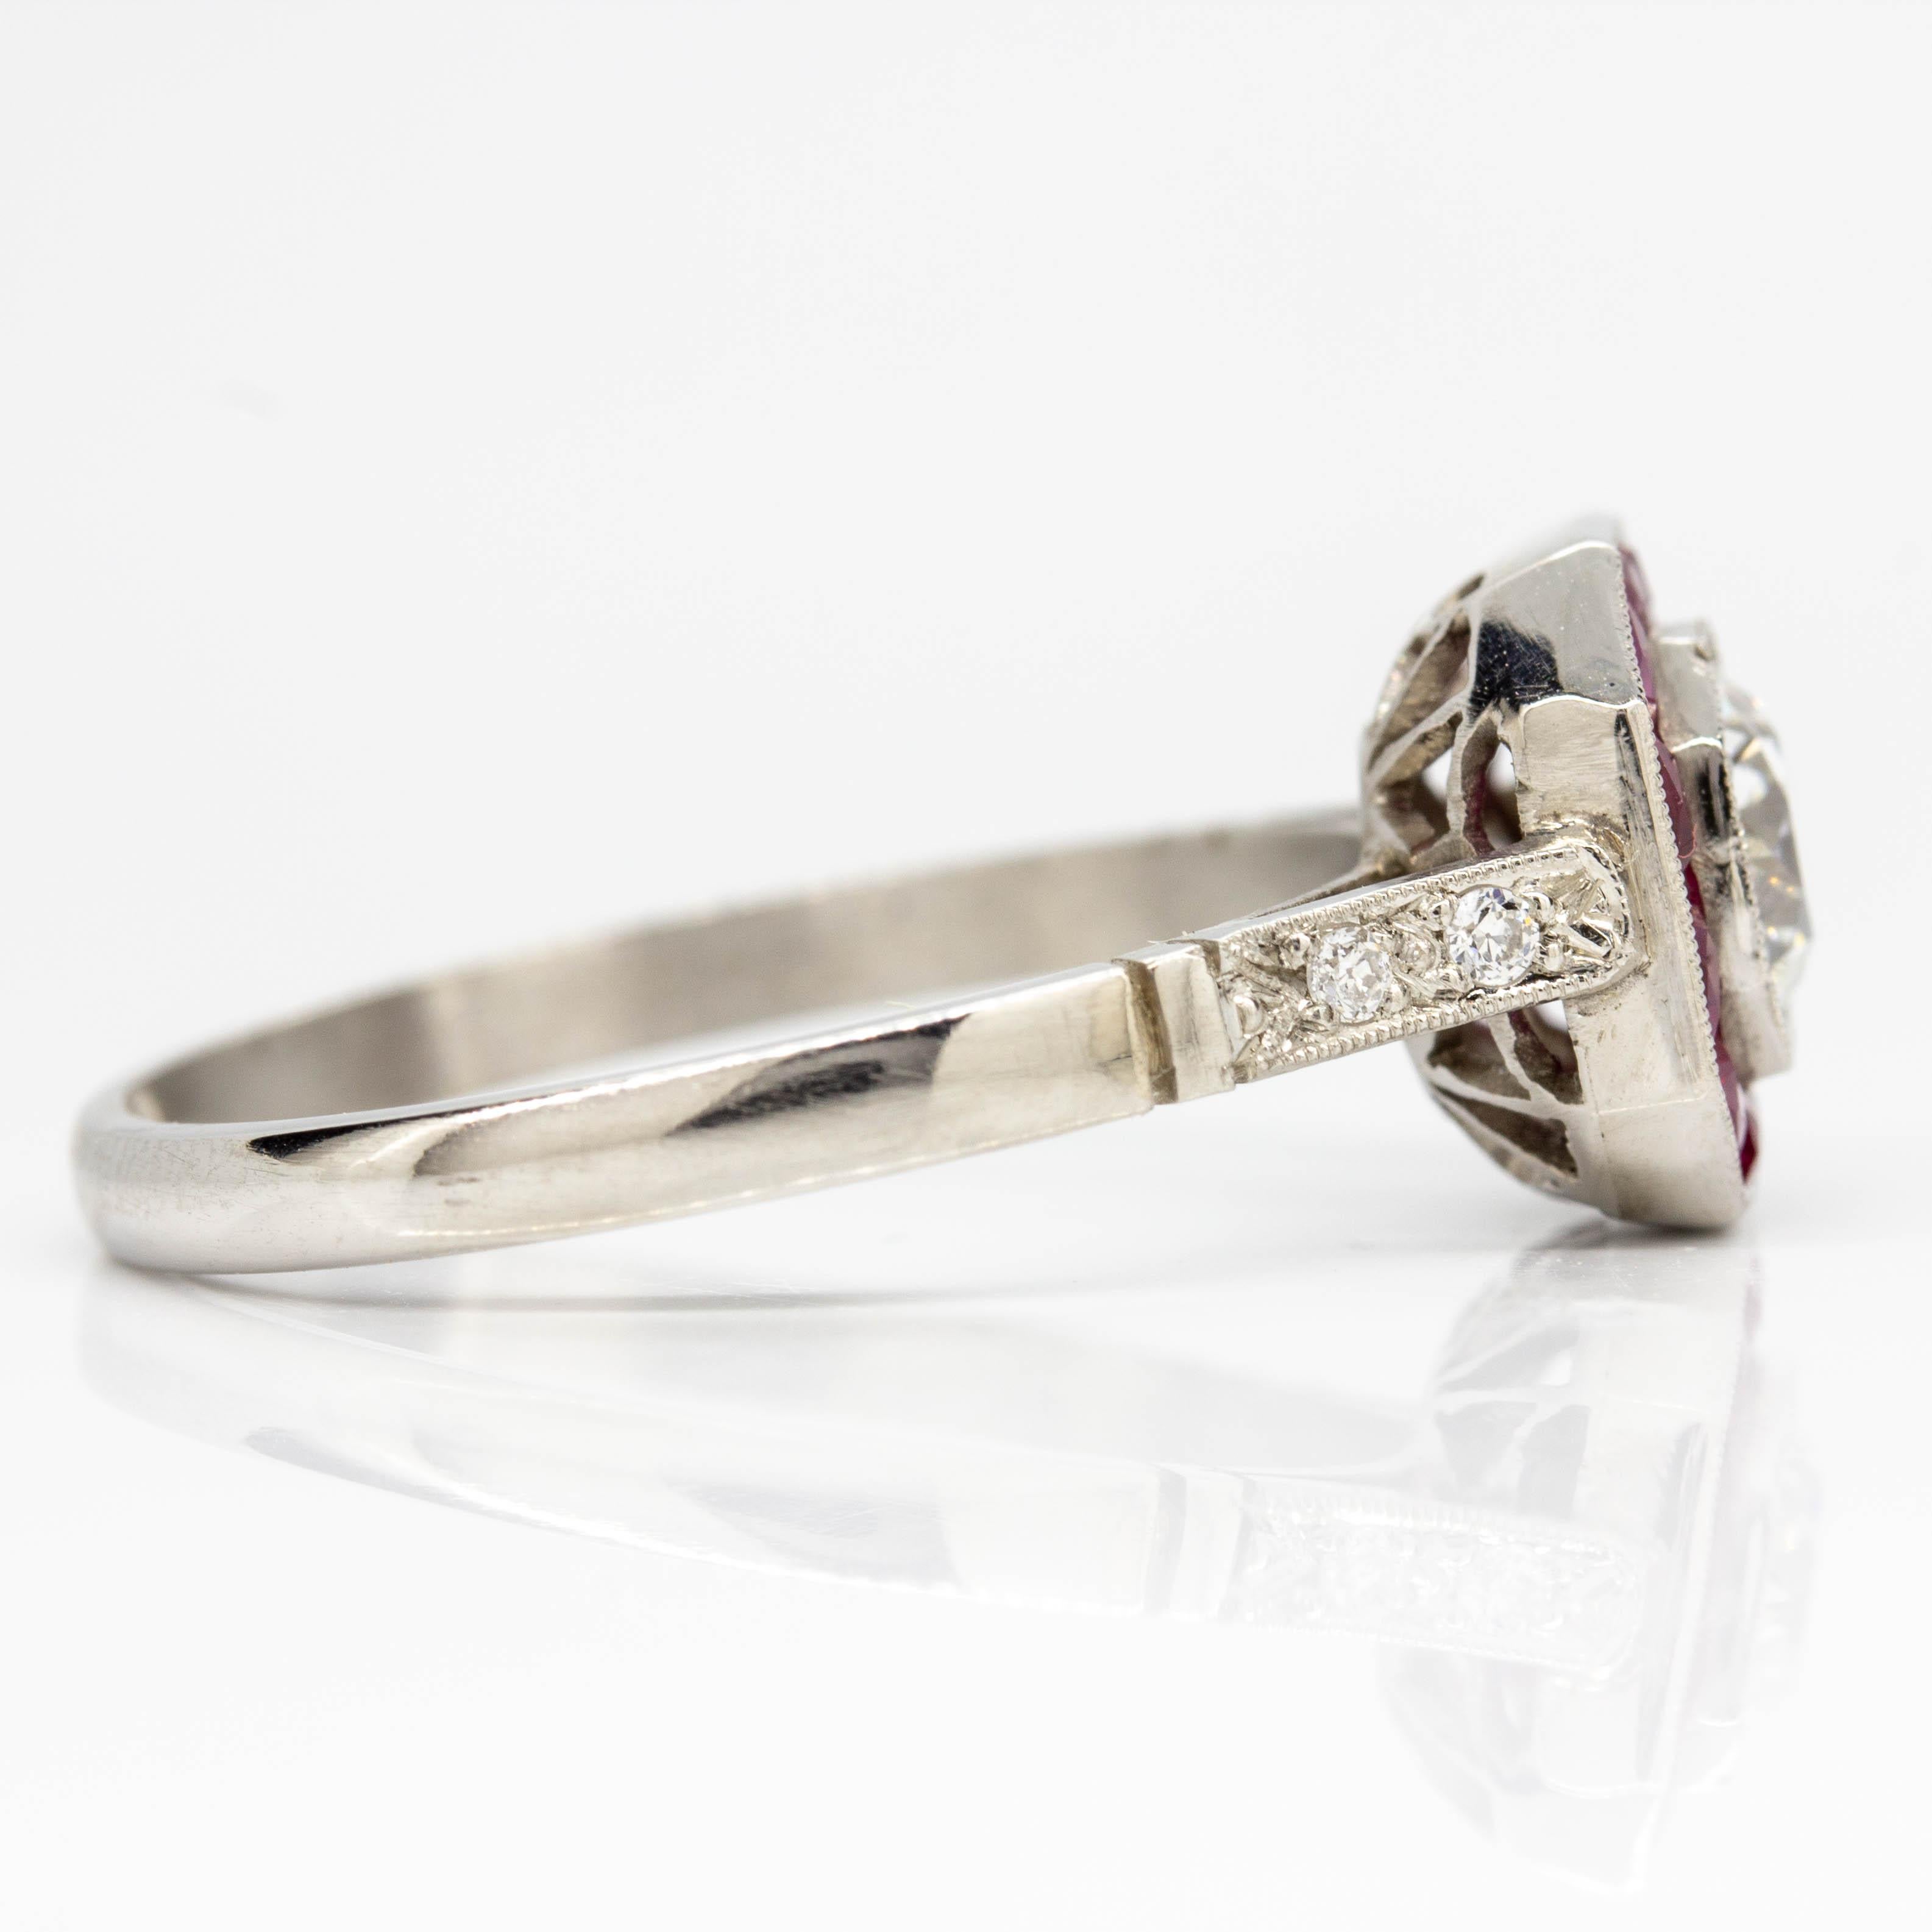 Composition: Platinum
•	1 old mine cut diamond I-VS1 0.60ctw.
•	12 natural calibrated cut rubies 1.20ctw.
•	4 old mine cut diamonds H-VS2 0.06ctw.
Ring size: 7 ¼ 
Ring face measure: 11mm by 12mm
Rise above finger: 6mm
Total weight:  3.8 grams –